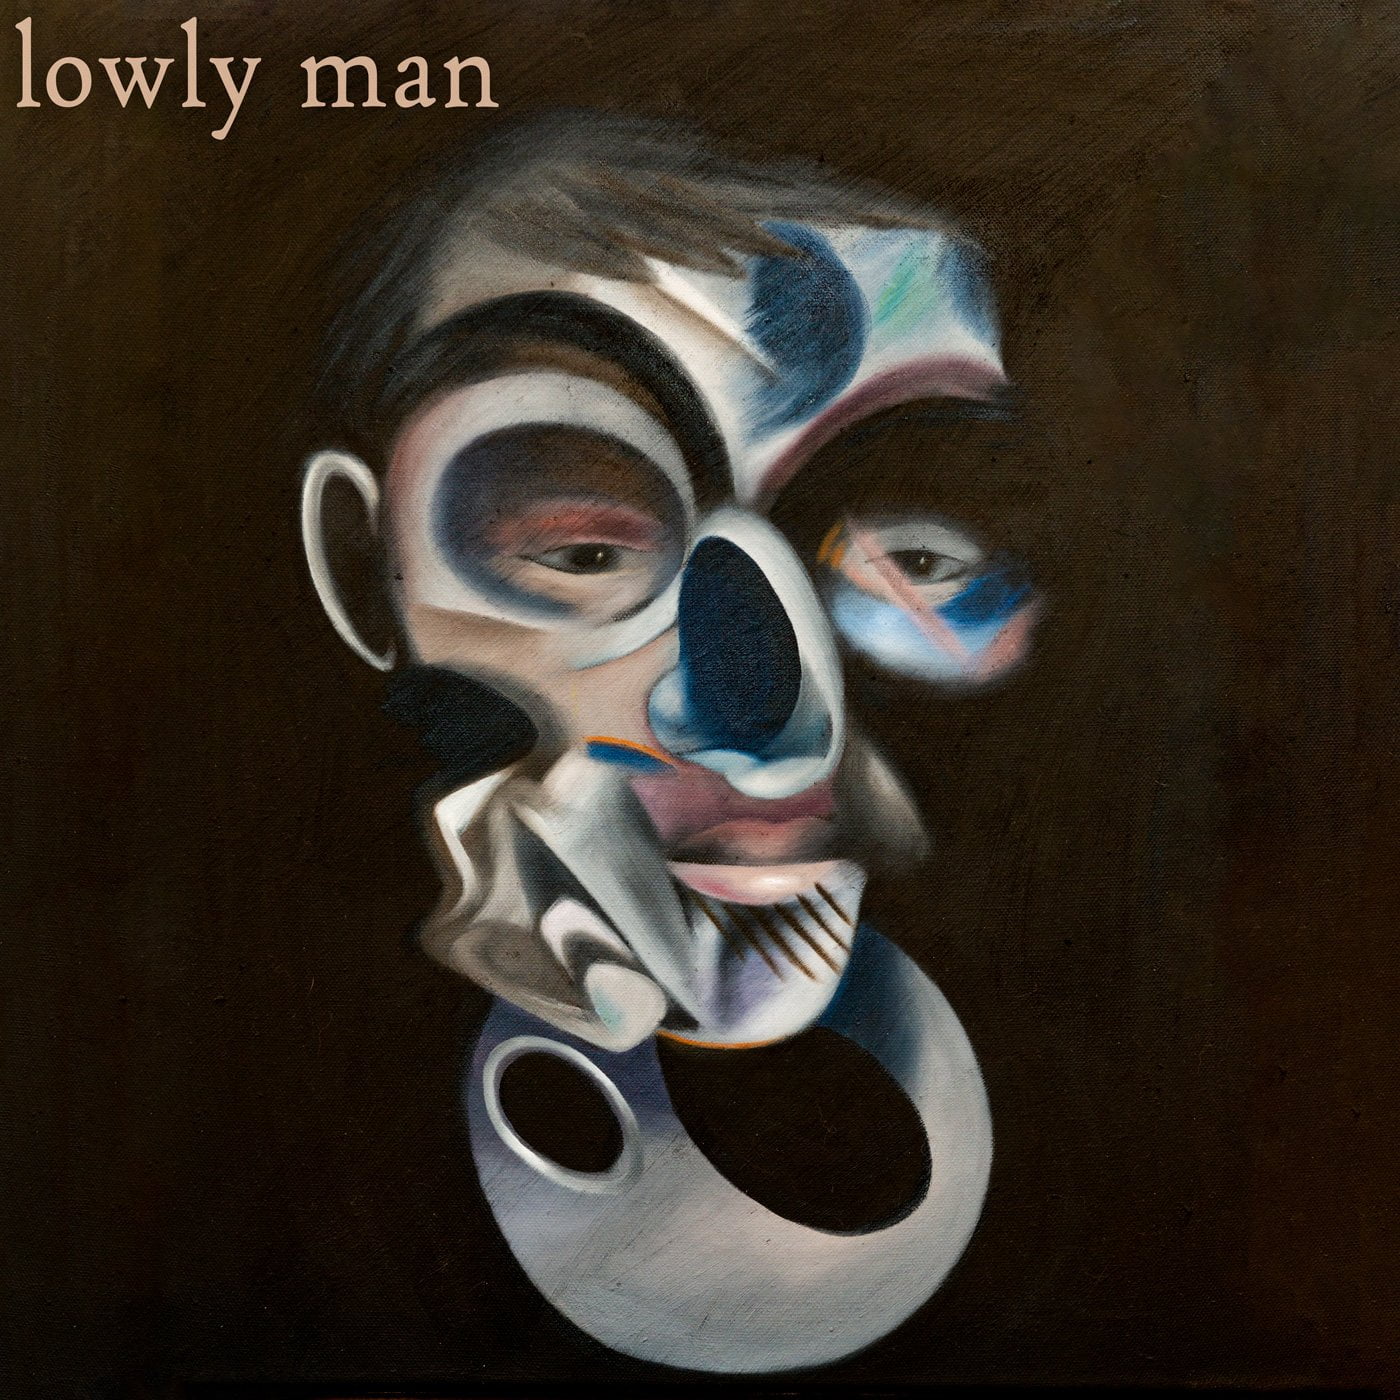 Lowly Man album cover - general release